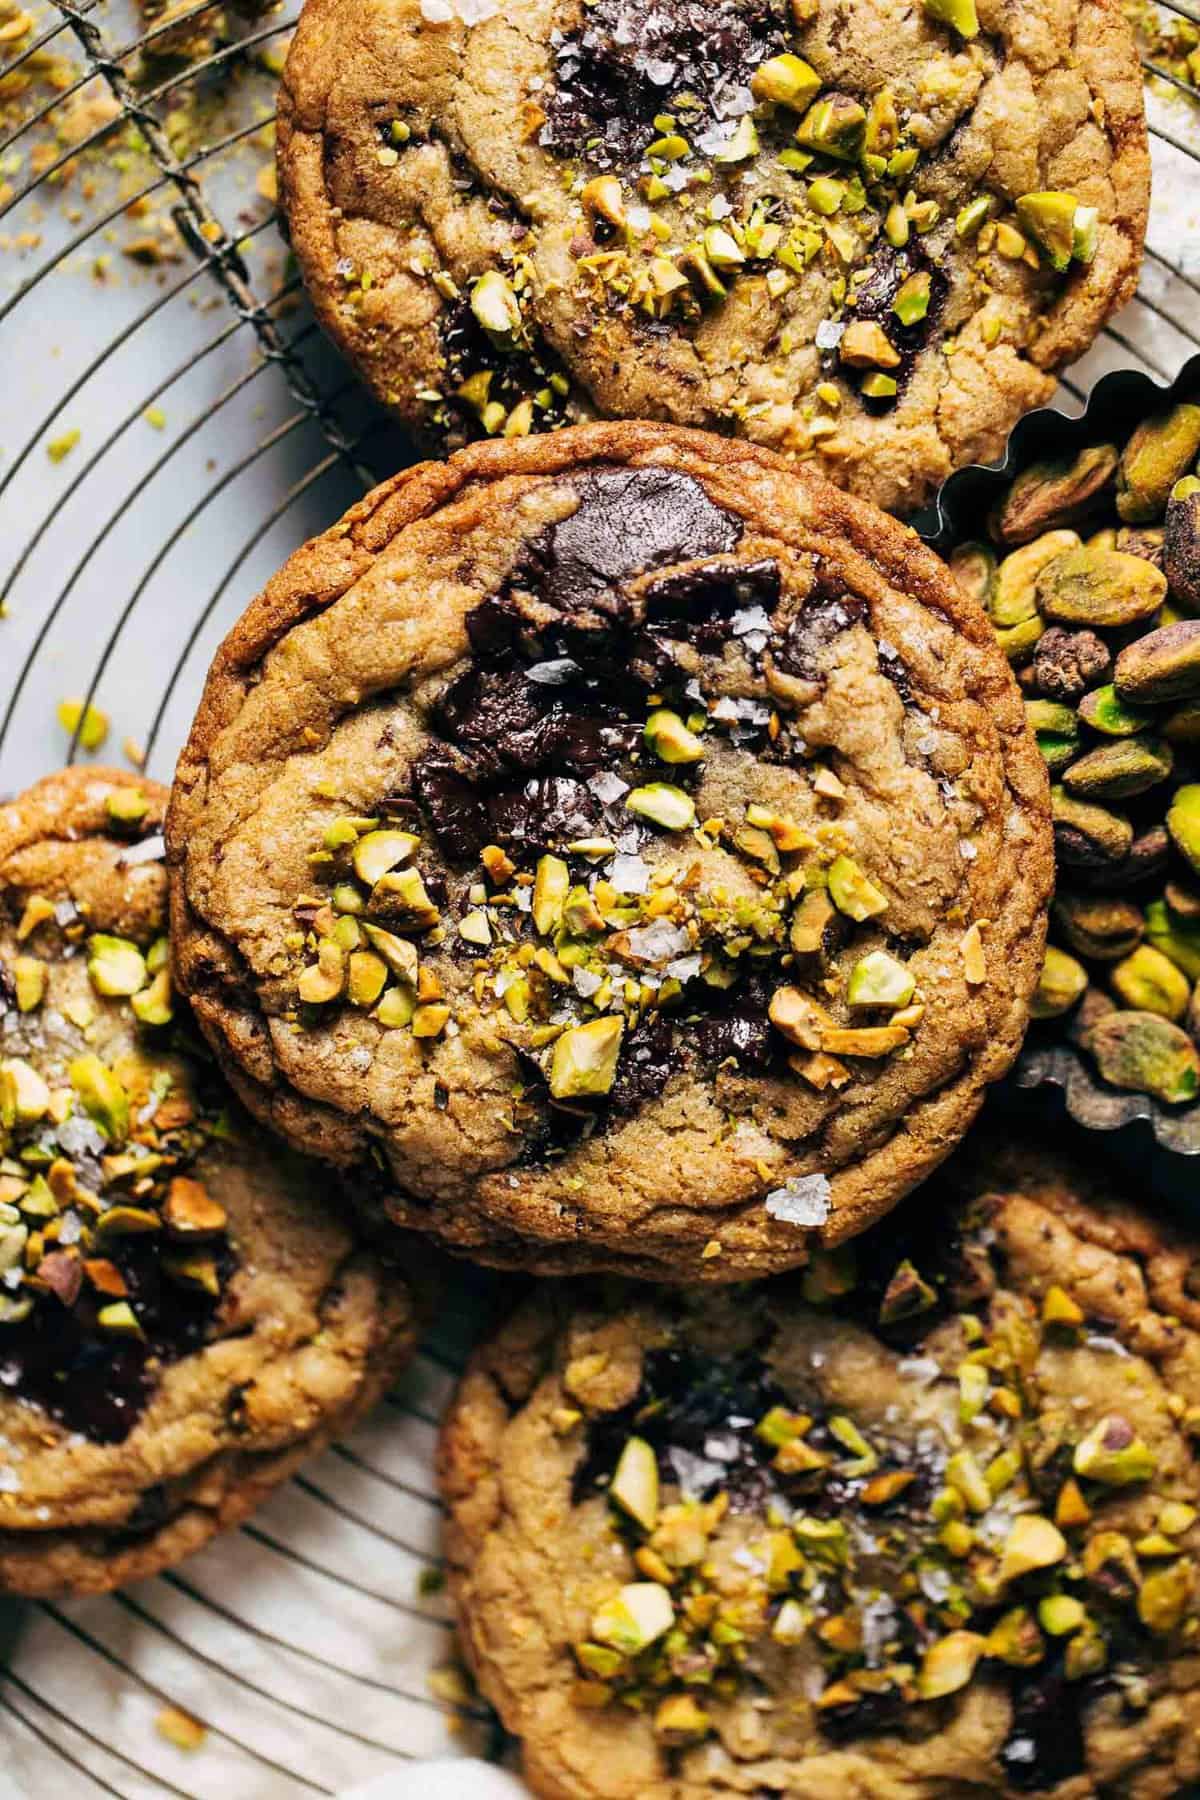 The Best Way To Incorporate Pistachio Into Your Baked Goods